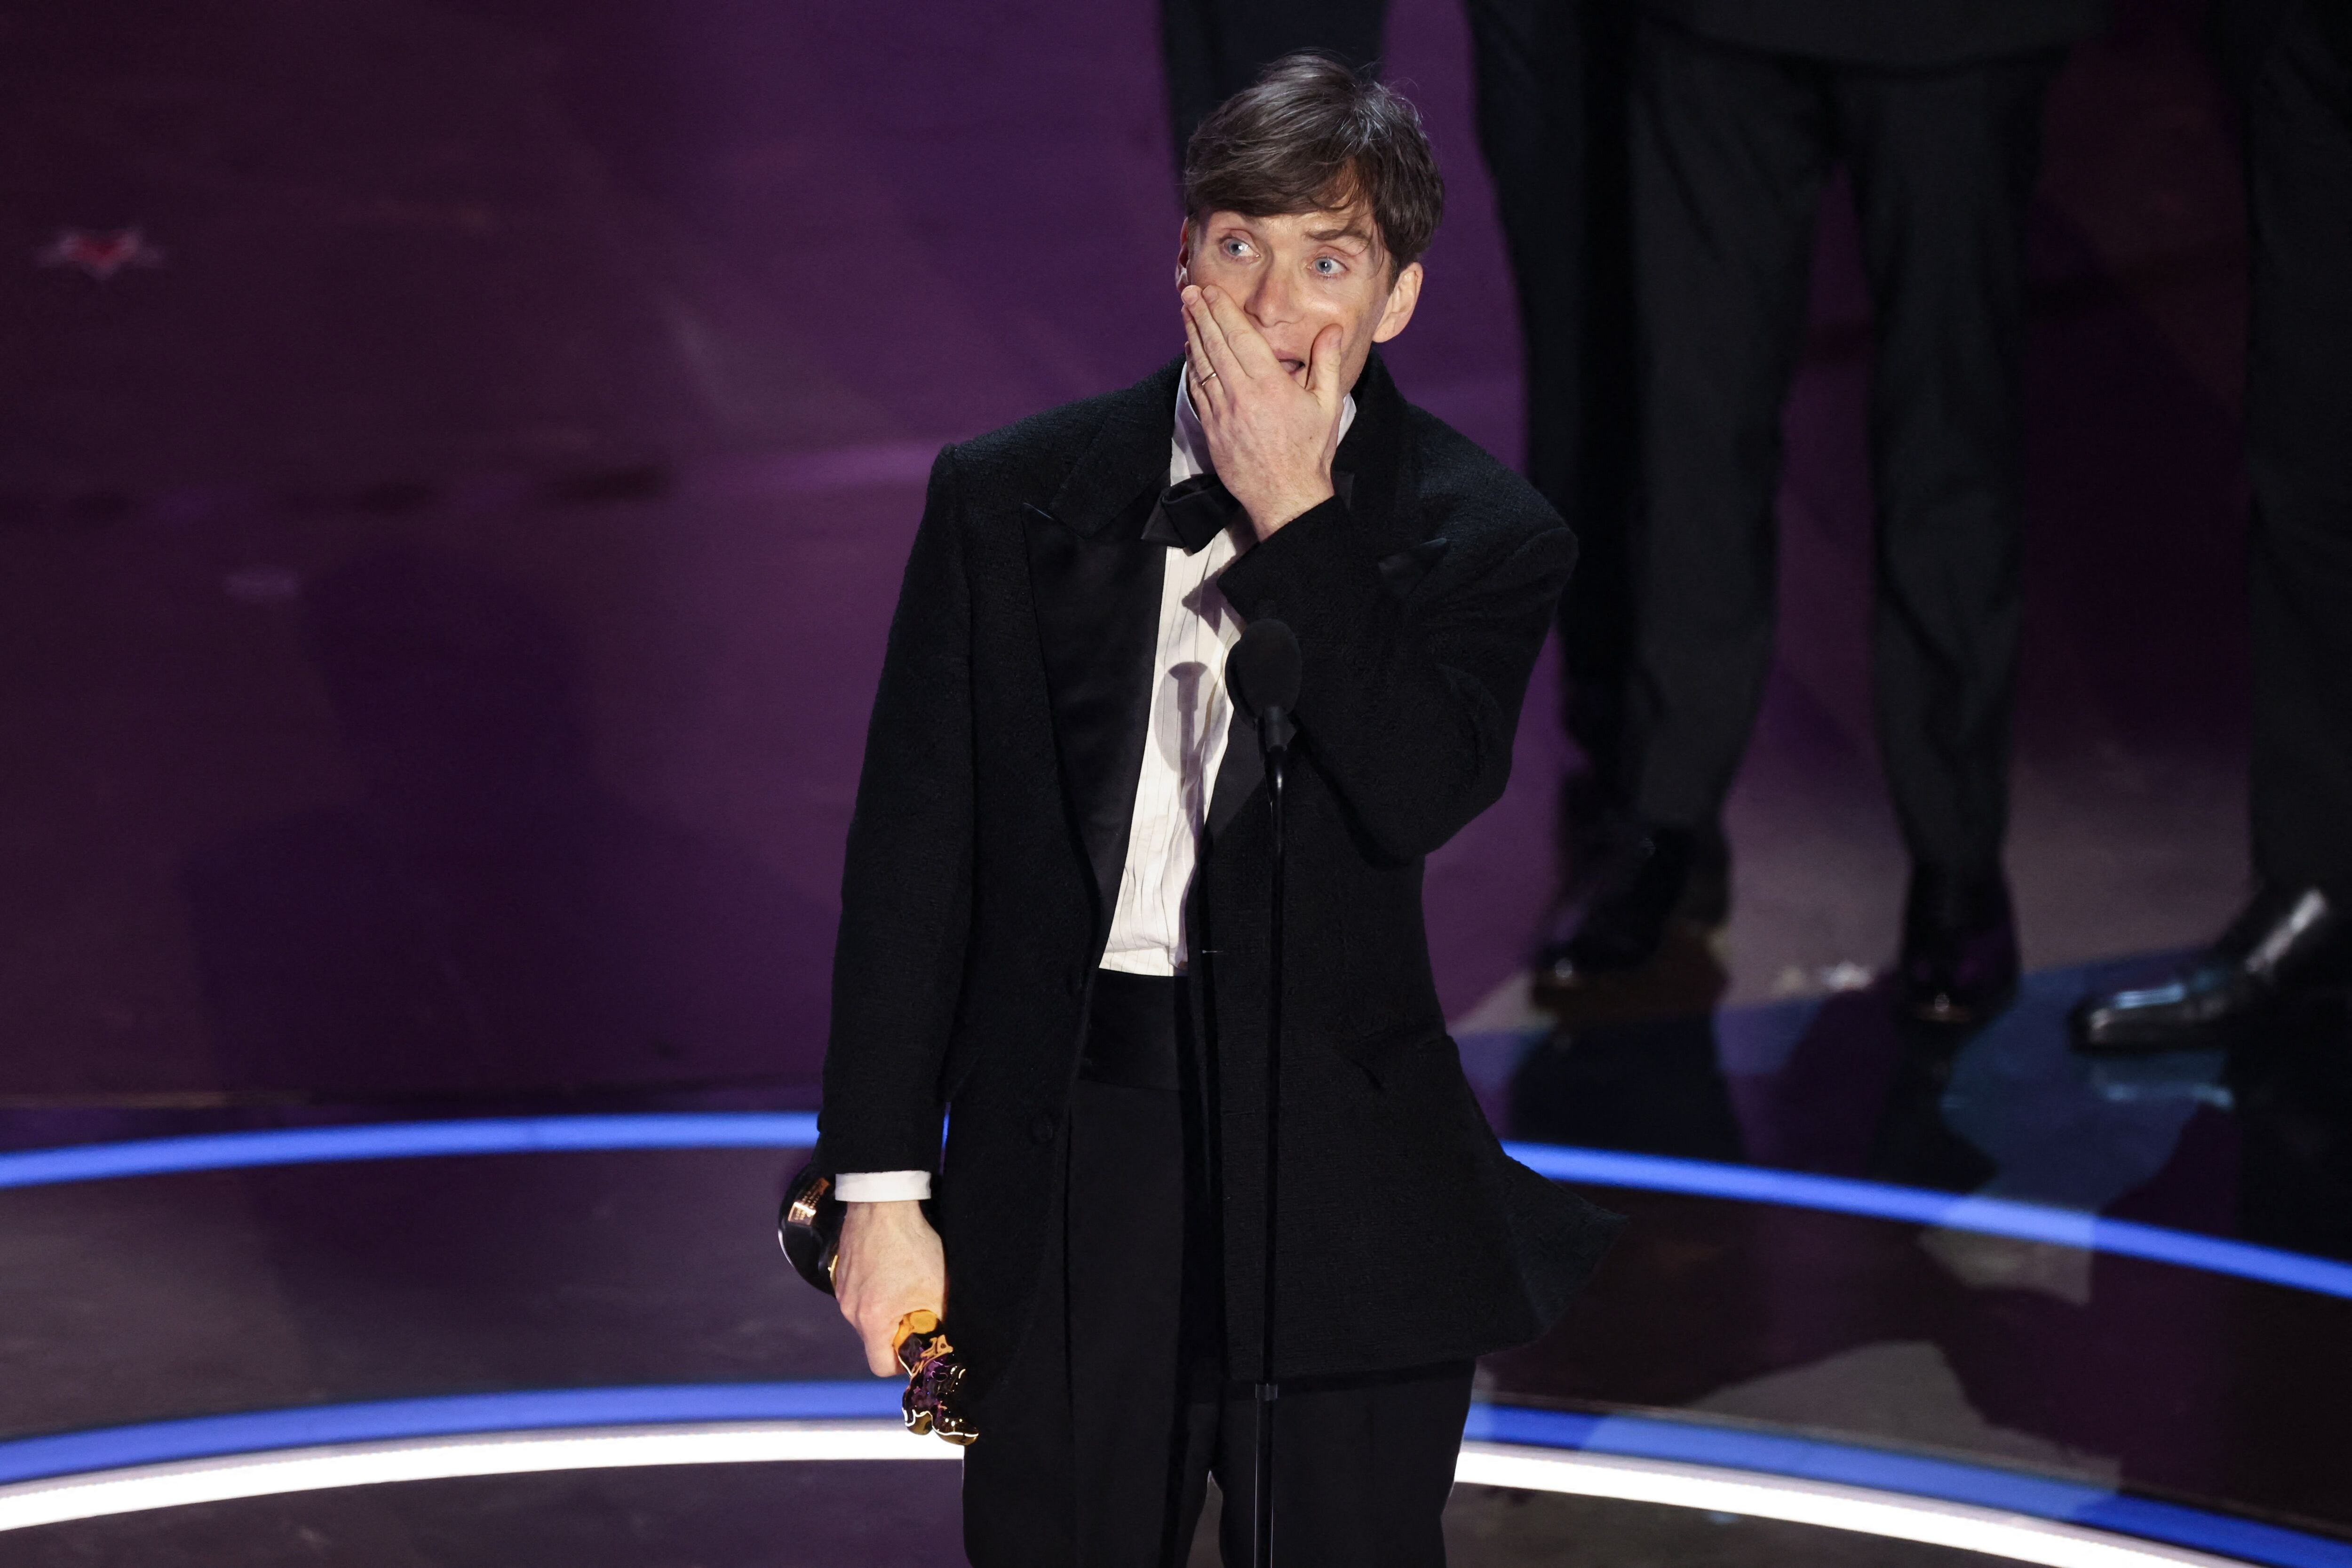 Cillian Murphy wins the Oscar for Best Actor for "Oppenheimer" during the Oscars show at the 96th Academy Awards in Hollywood, Los Angeles, California, U.S., March 10, 2024. REUTERS/Mike Blake